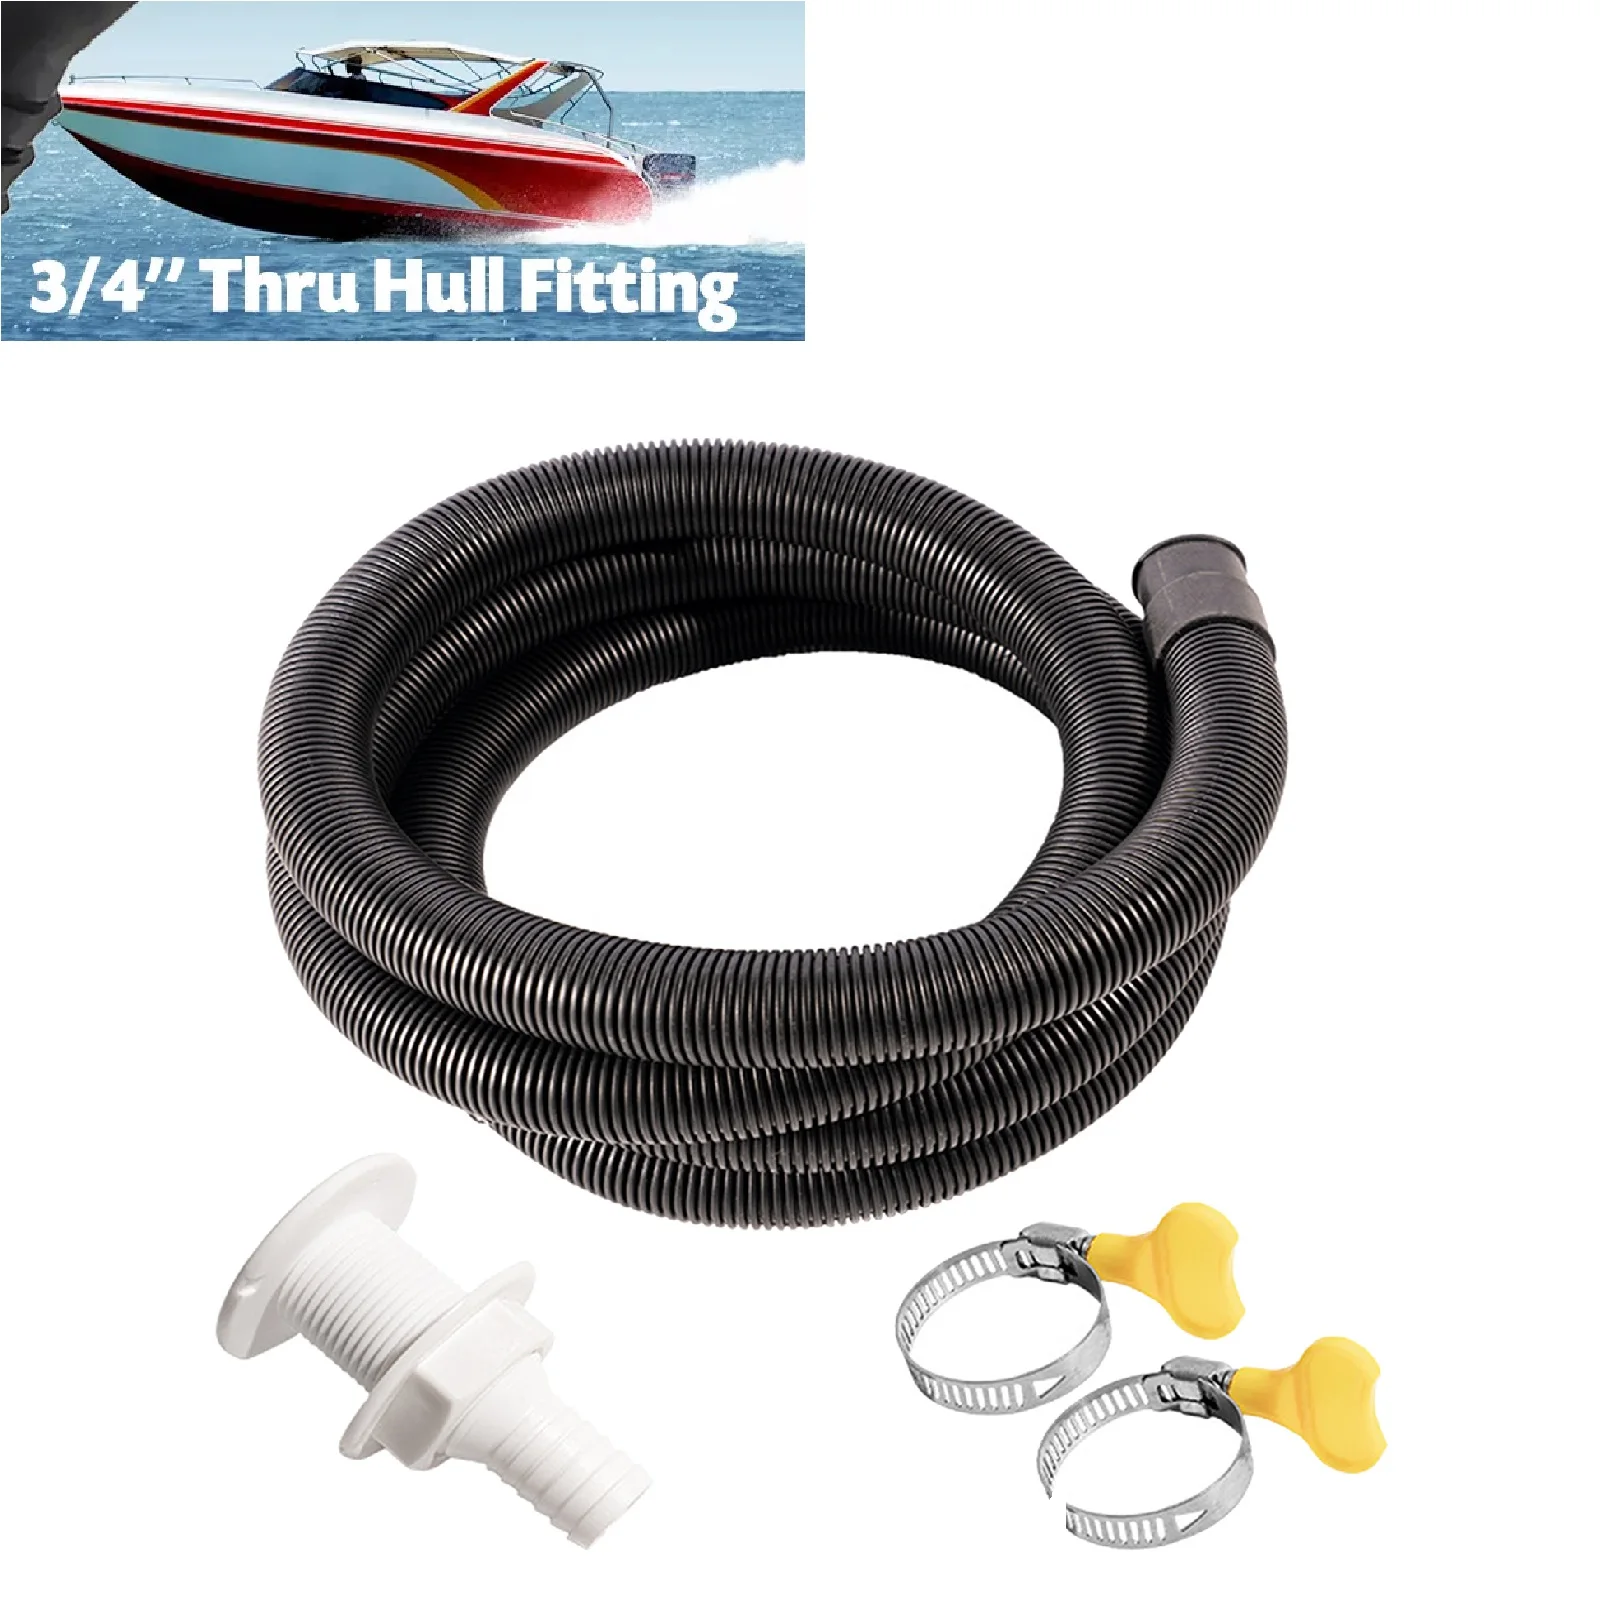 Flexible Bilge Pump Hose Installation Kit 3/4-Inch Diameter 6.6 FT for Boats with 2 Clamps and Thru-Hull Fitting soft flexible tpu hard pc anti slip protective phone case with magnetic kickstand for iphone 13 pro 6 1 inch lemon yellow orange